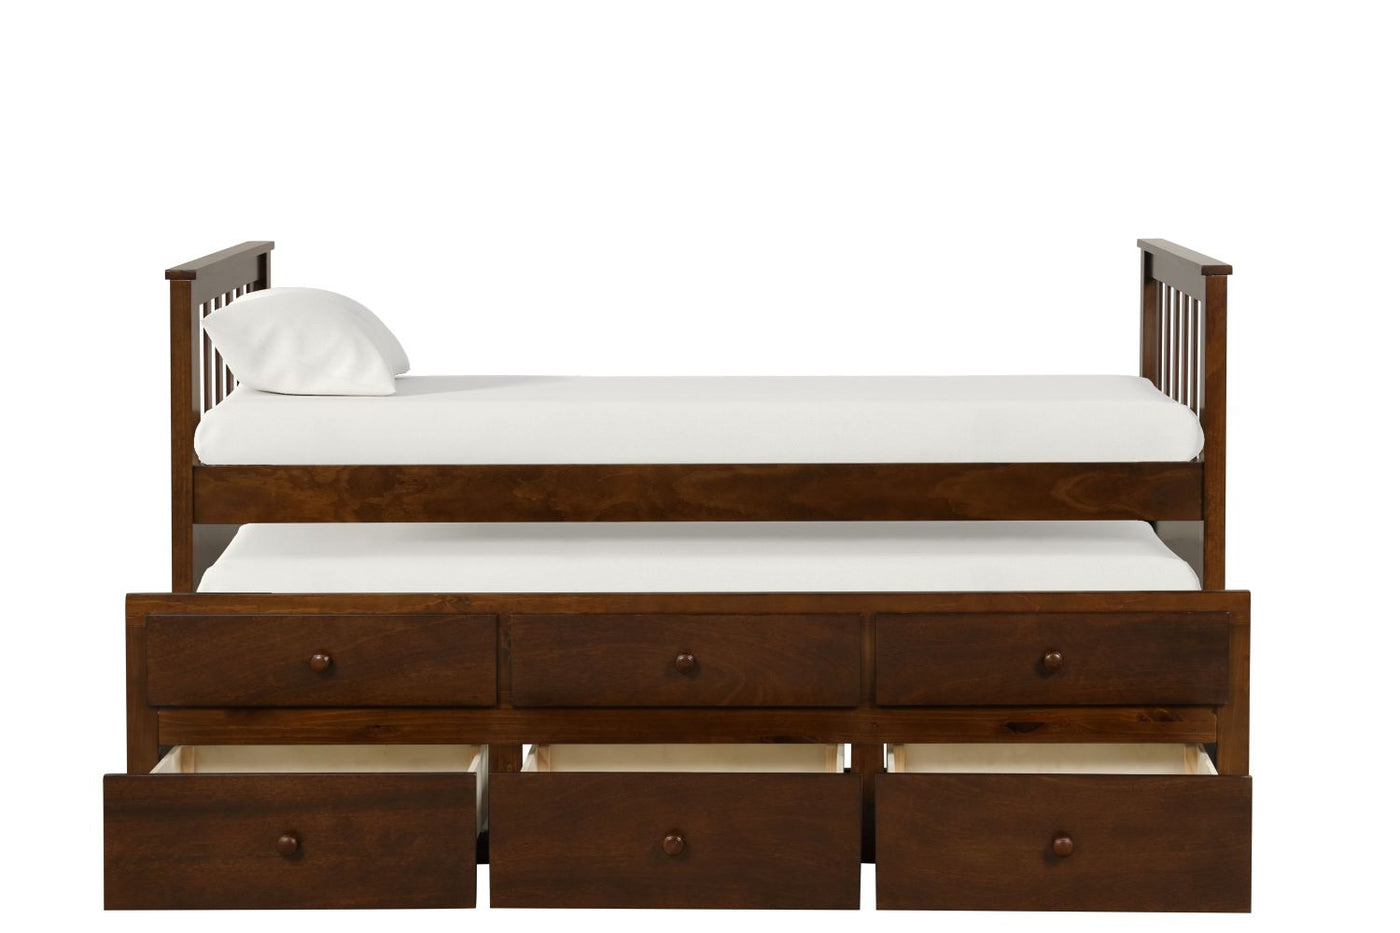 Trudy 3-Piece Twin Captain Bed with Trundle - Espresso